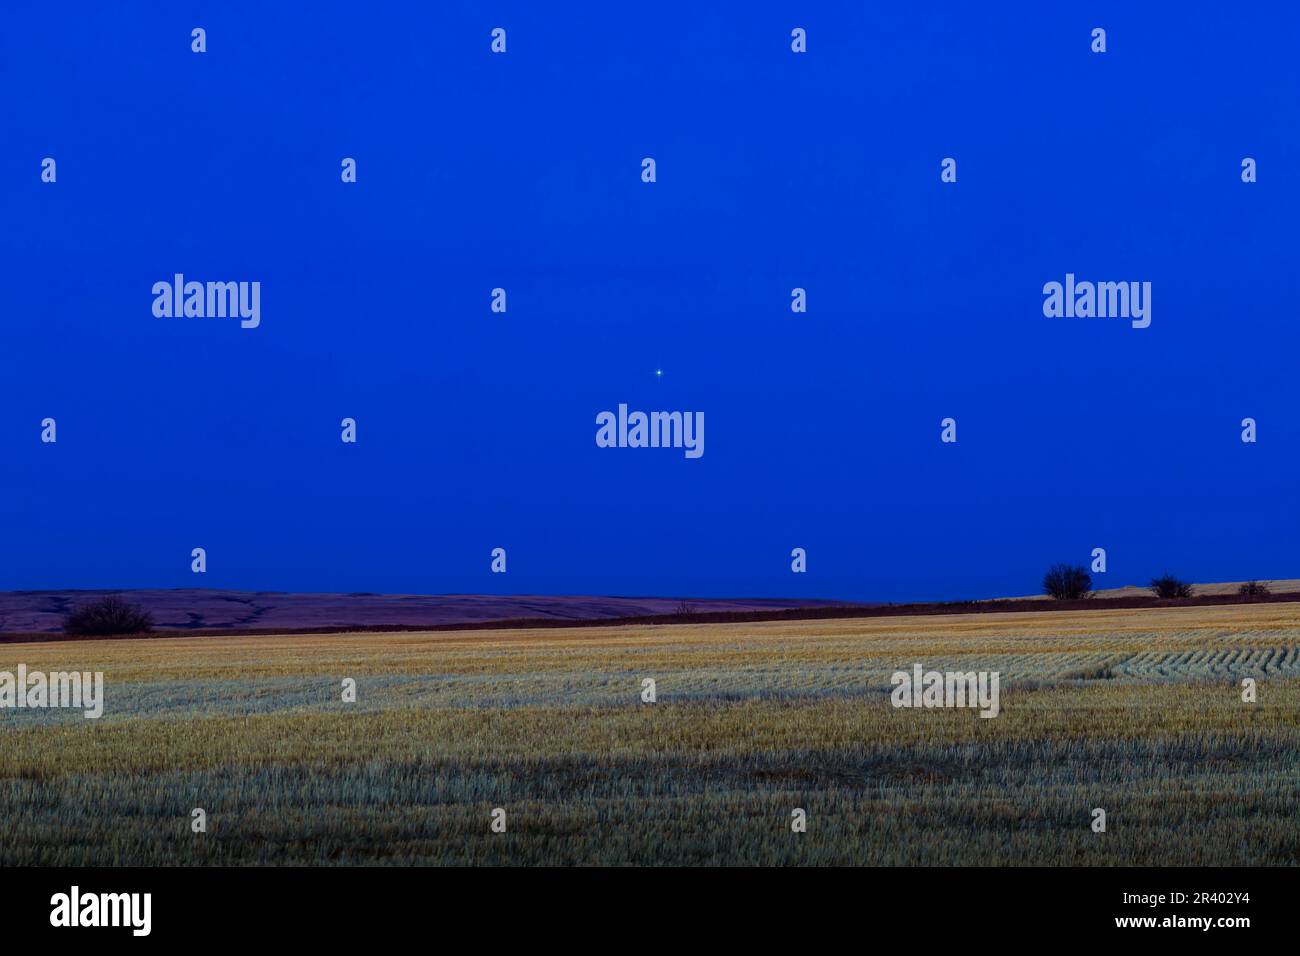 October 12, 2020 - Mars rising over a harvested field in southern Alberta, Canada. Stock Photo